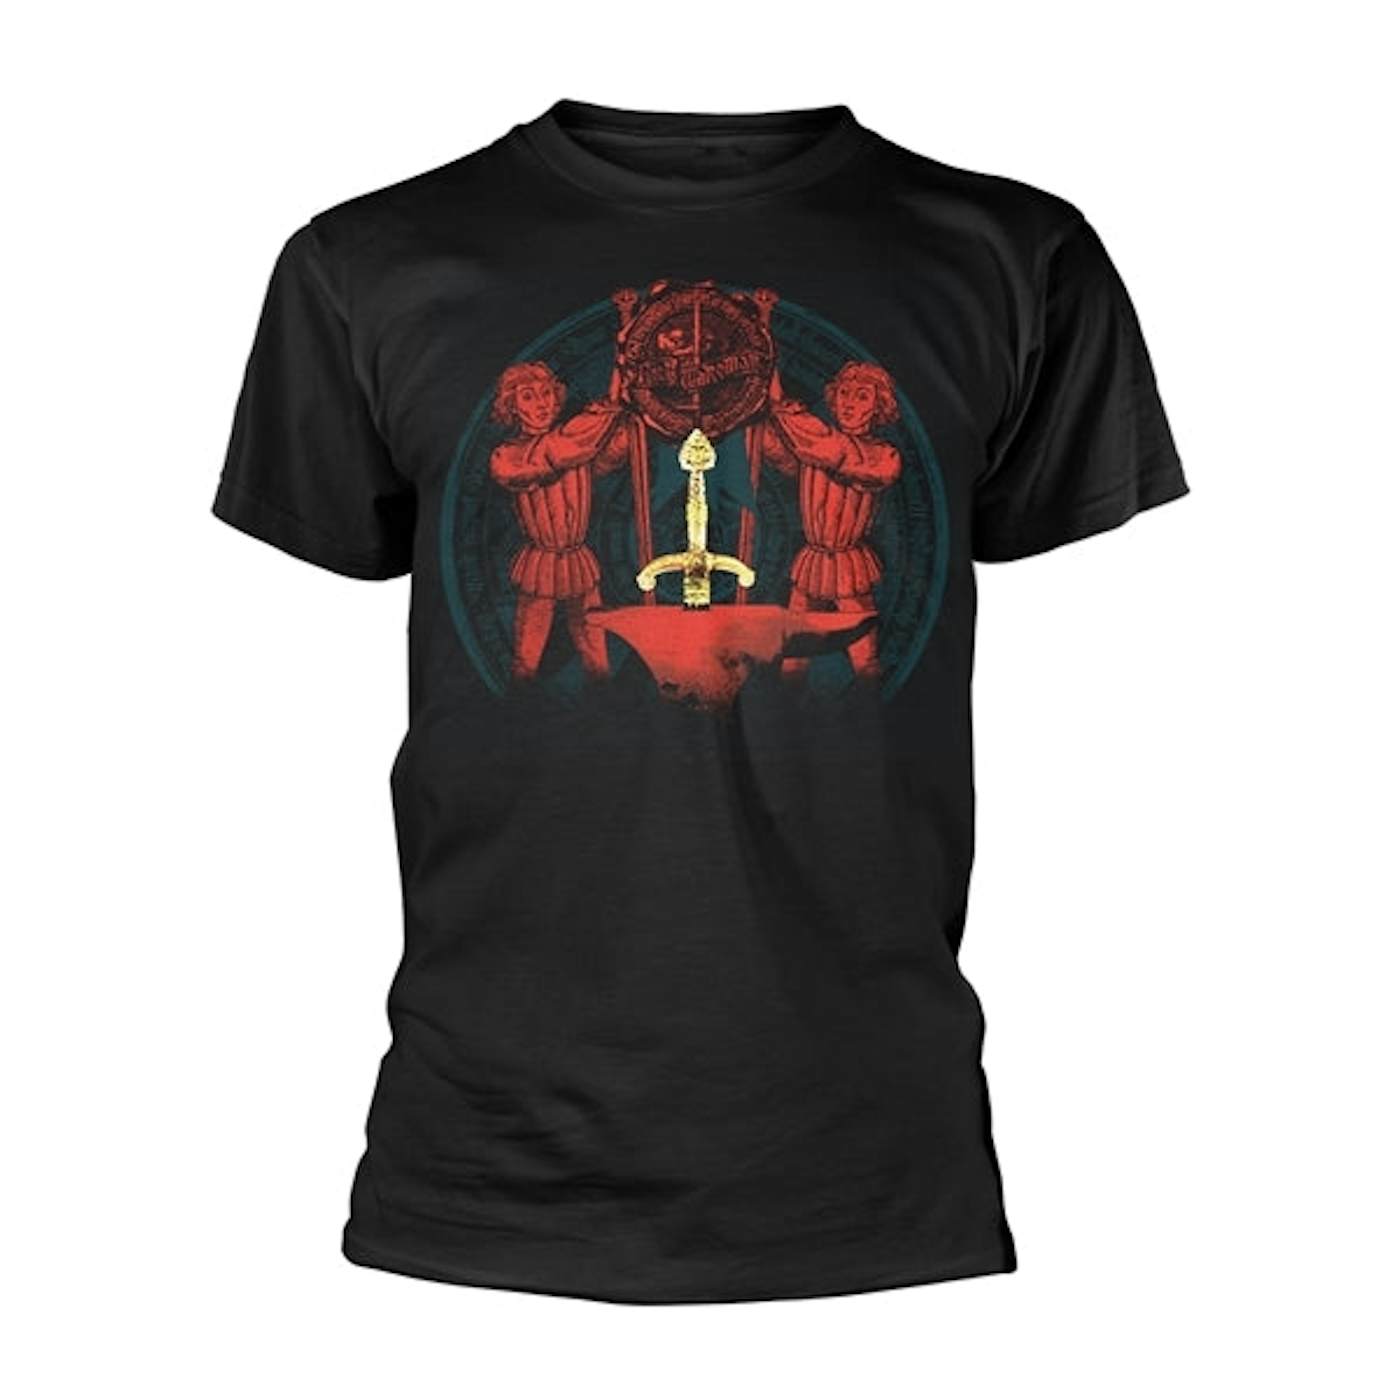 Rick Wakeman T Shirt - The Myths And Legends Of King Arthur And The Knights Of The Round Table